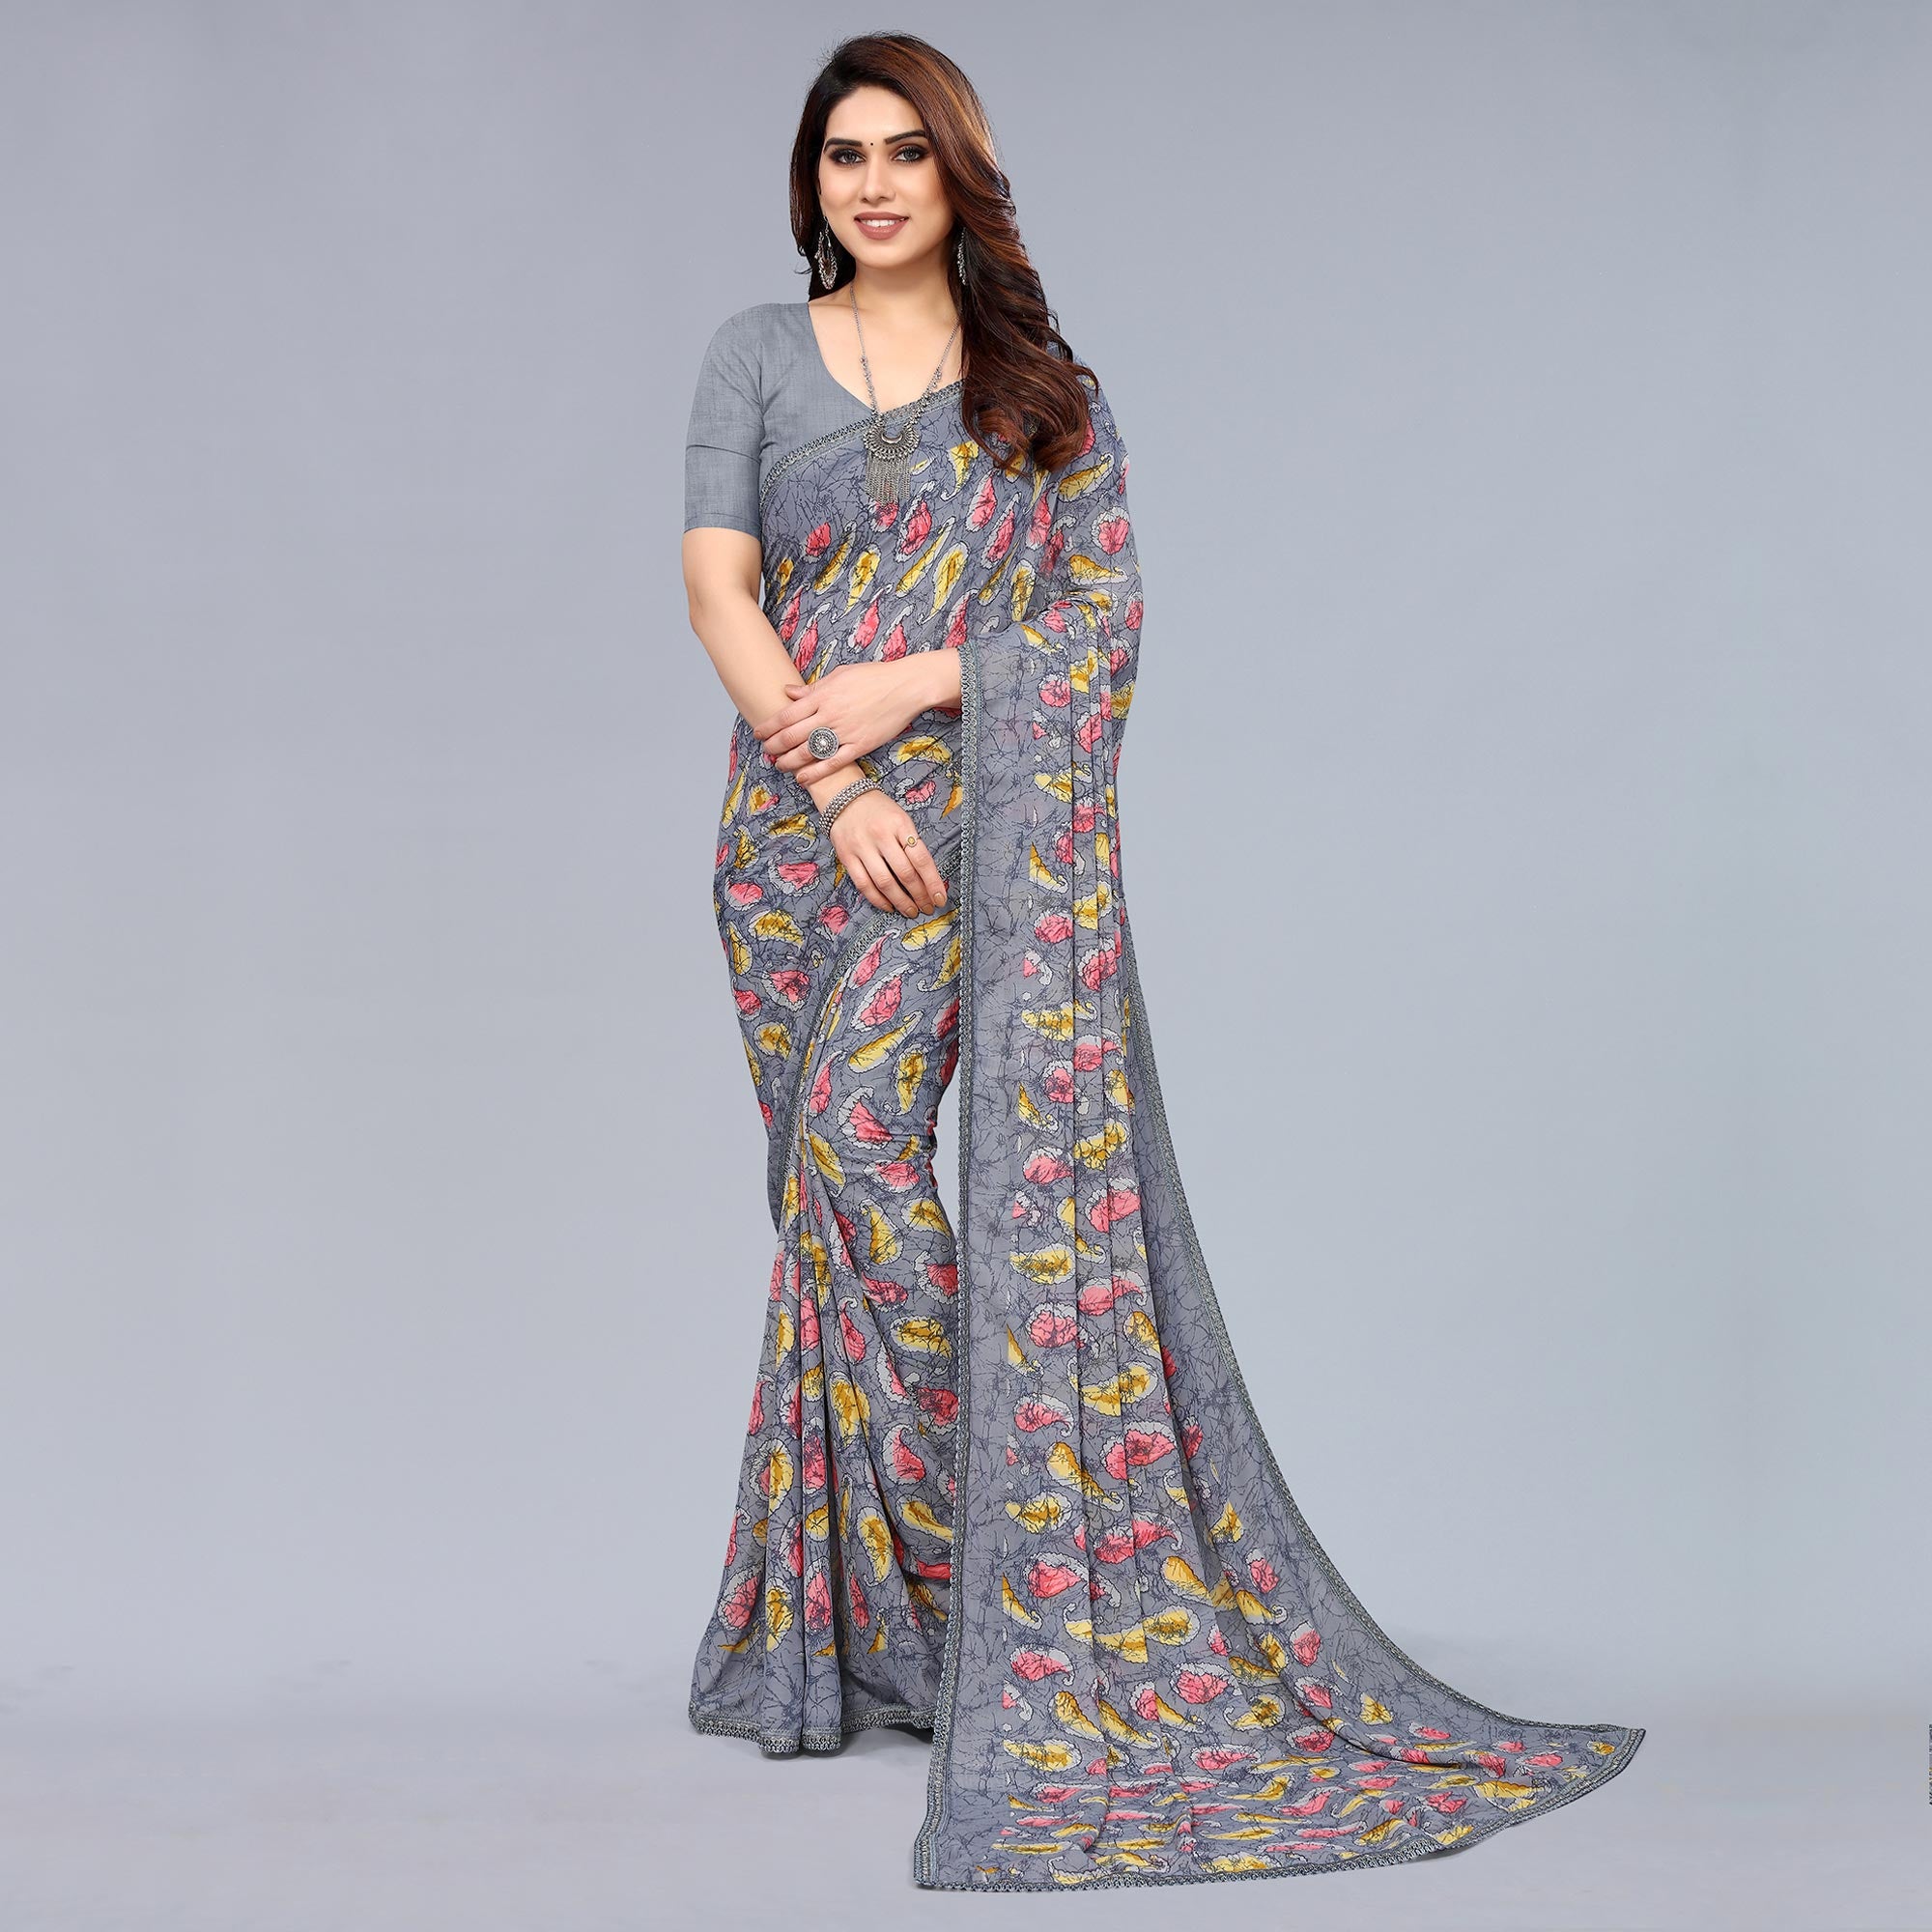 Grey Printed Georgette Saree With Crochet Border